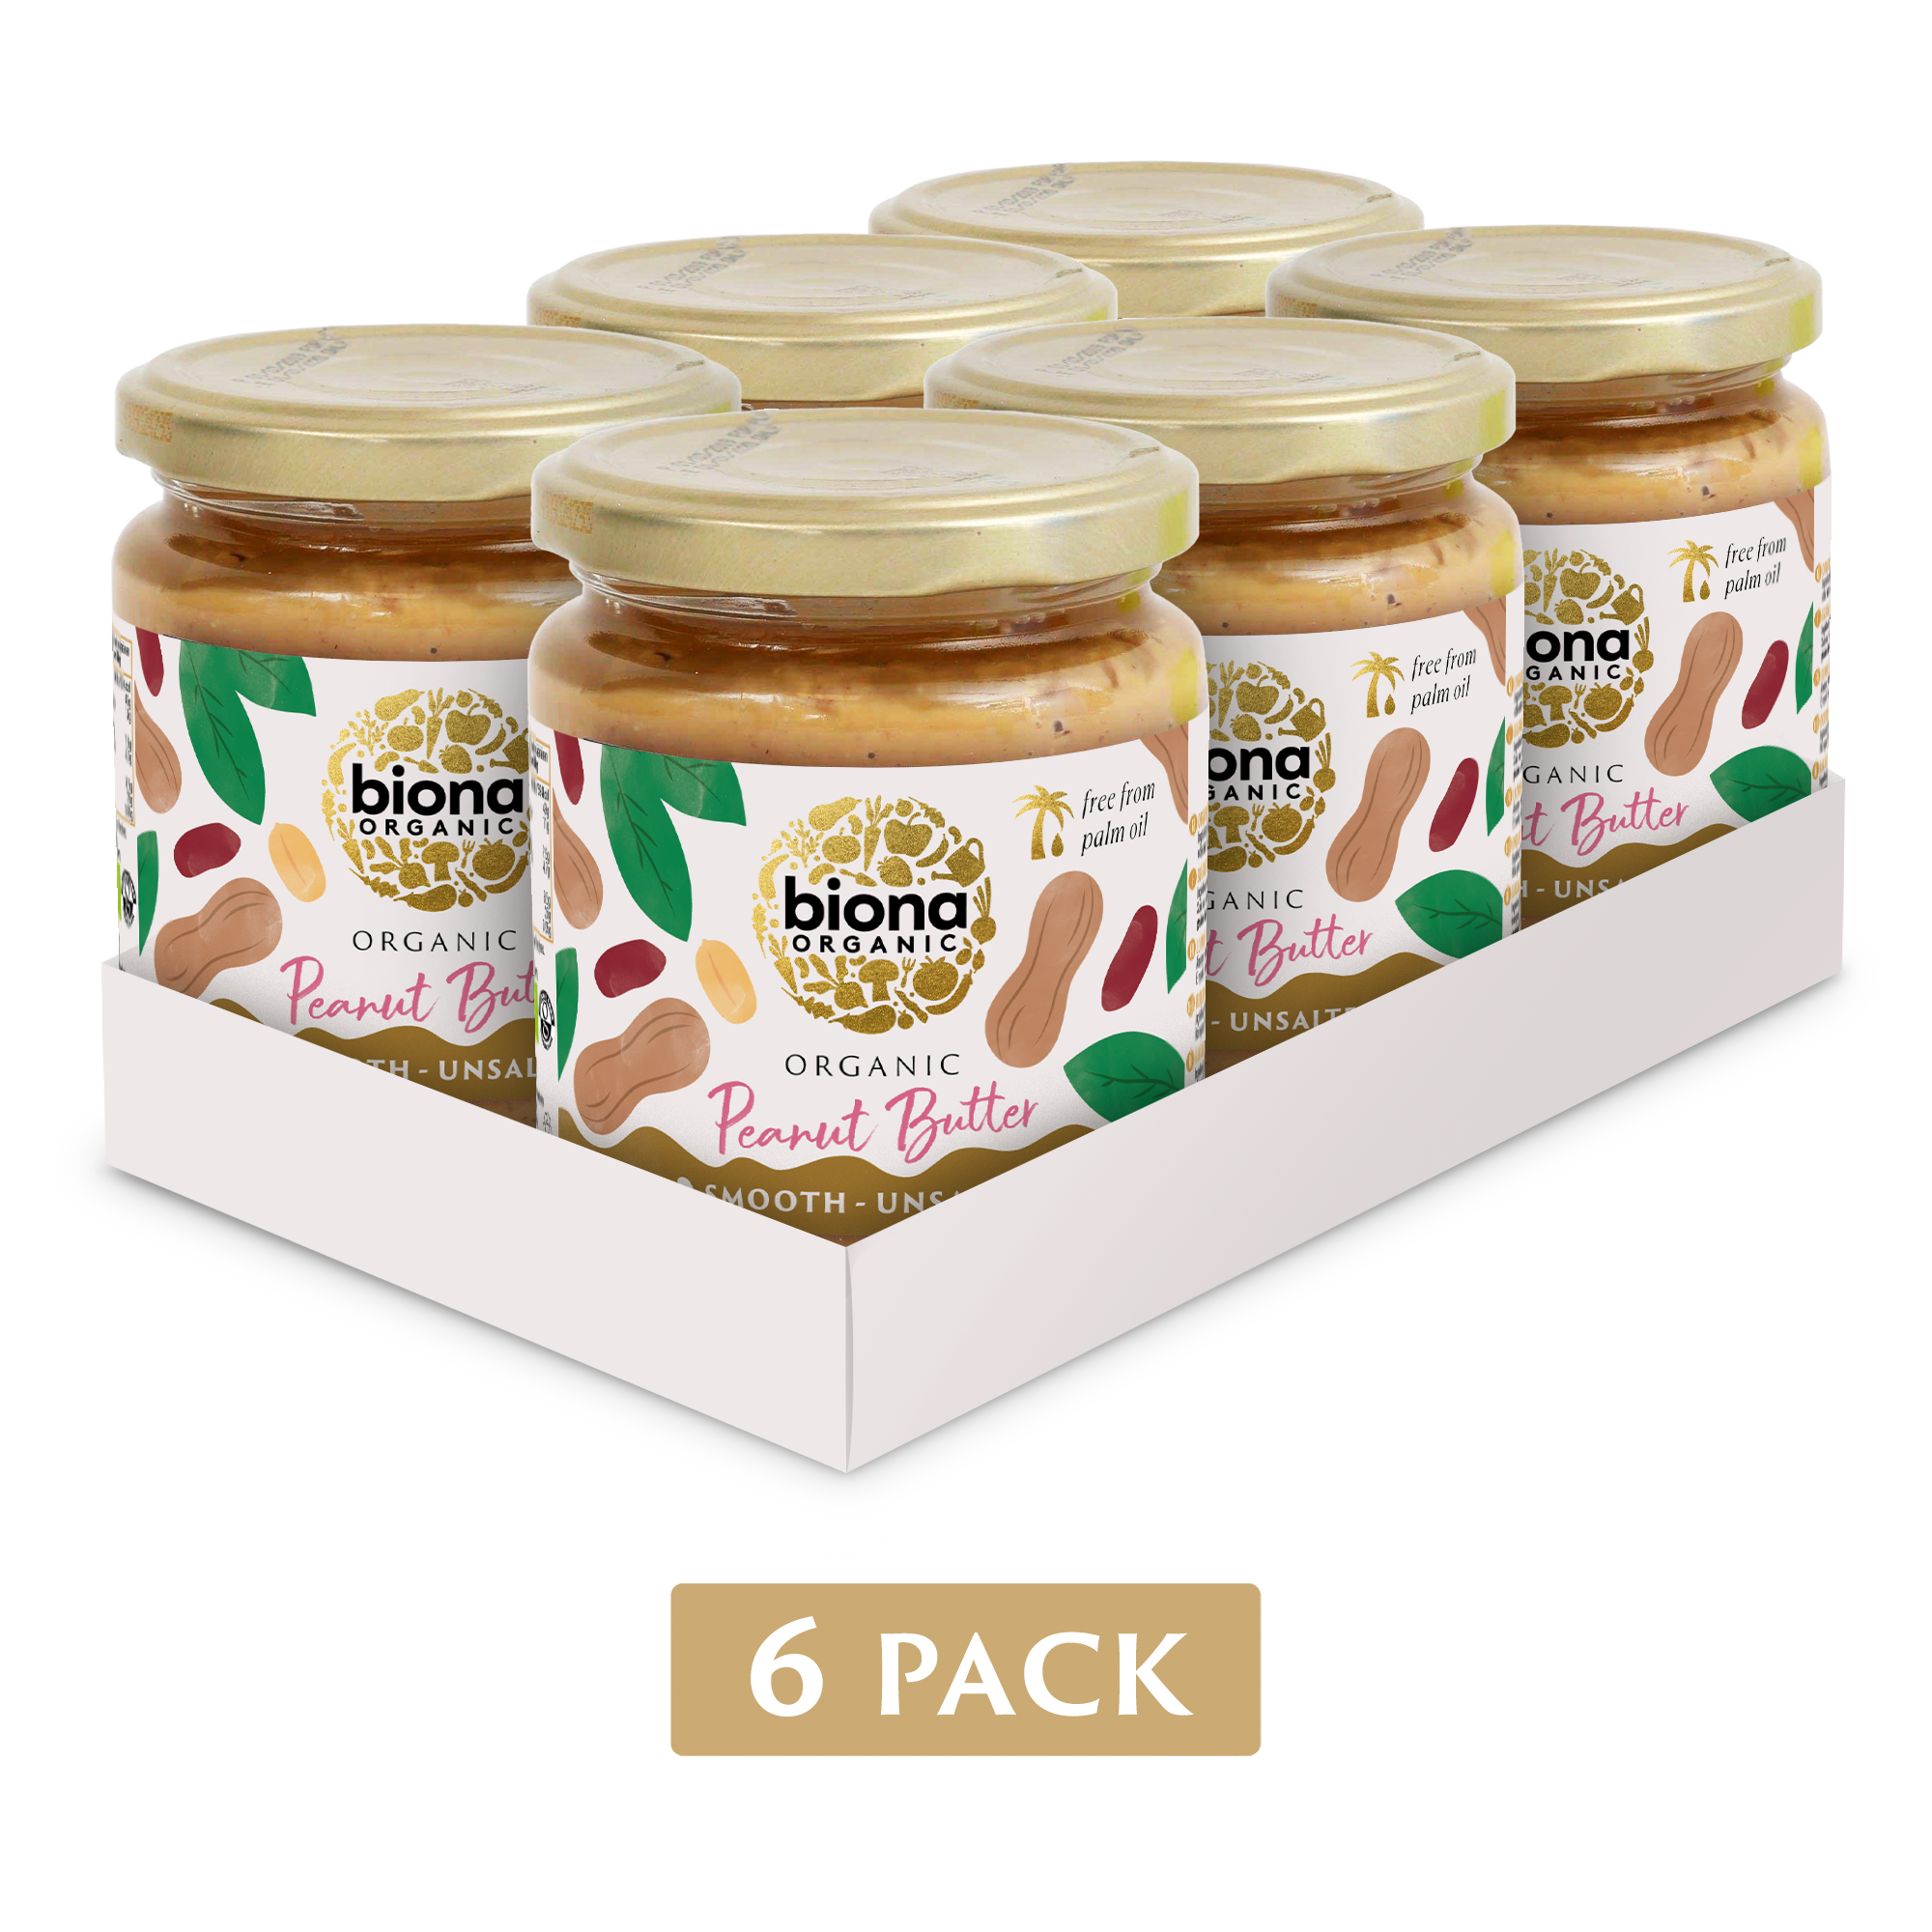 Biona Organic Peanut Butter Smooth - 6 pack